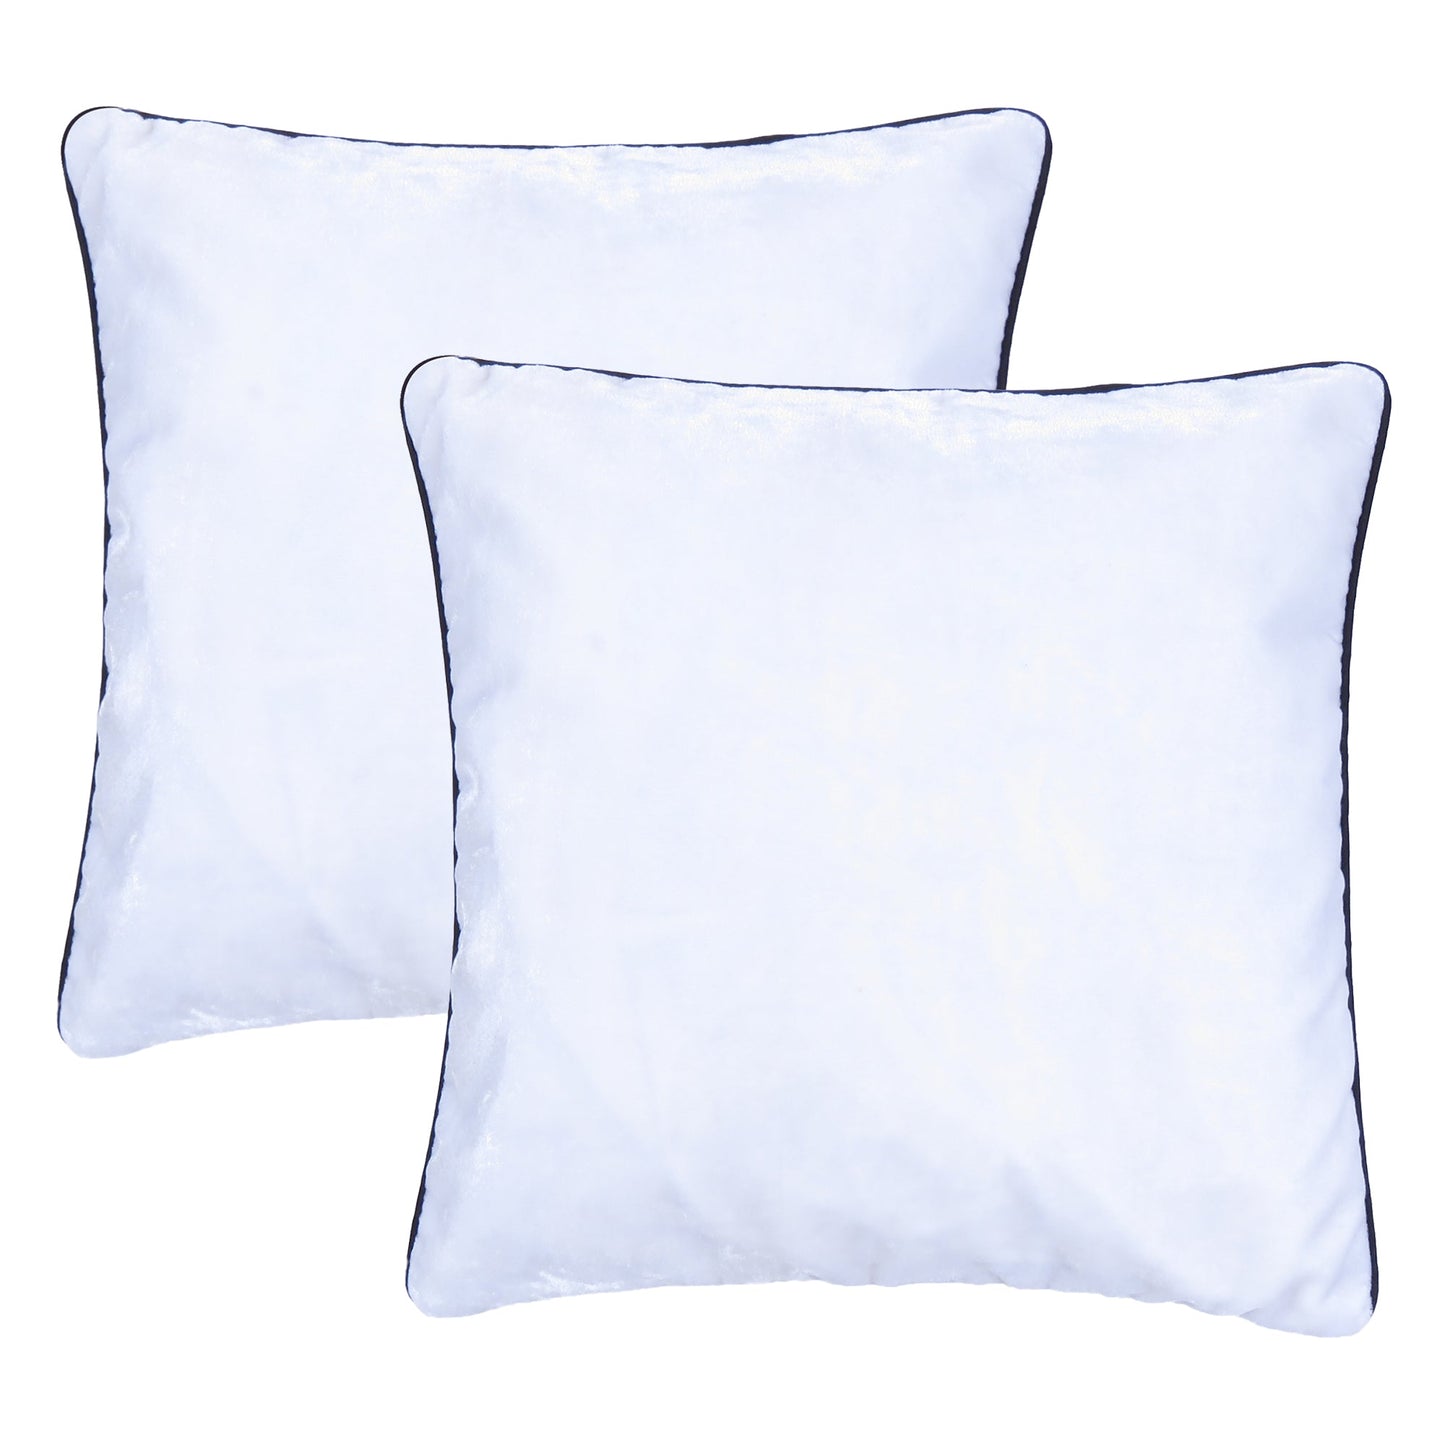 White Velvet Cushion Cover with Black Piping Edge in Set of 2